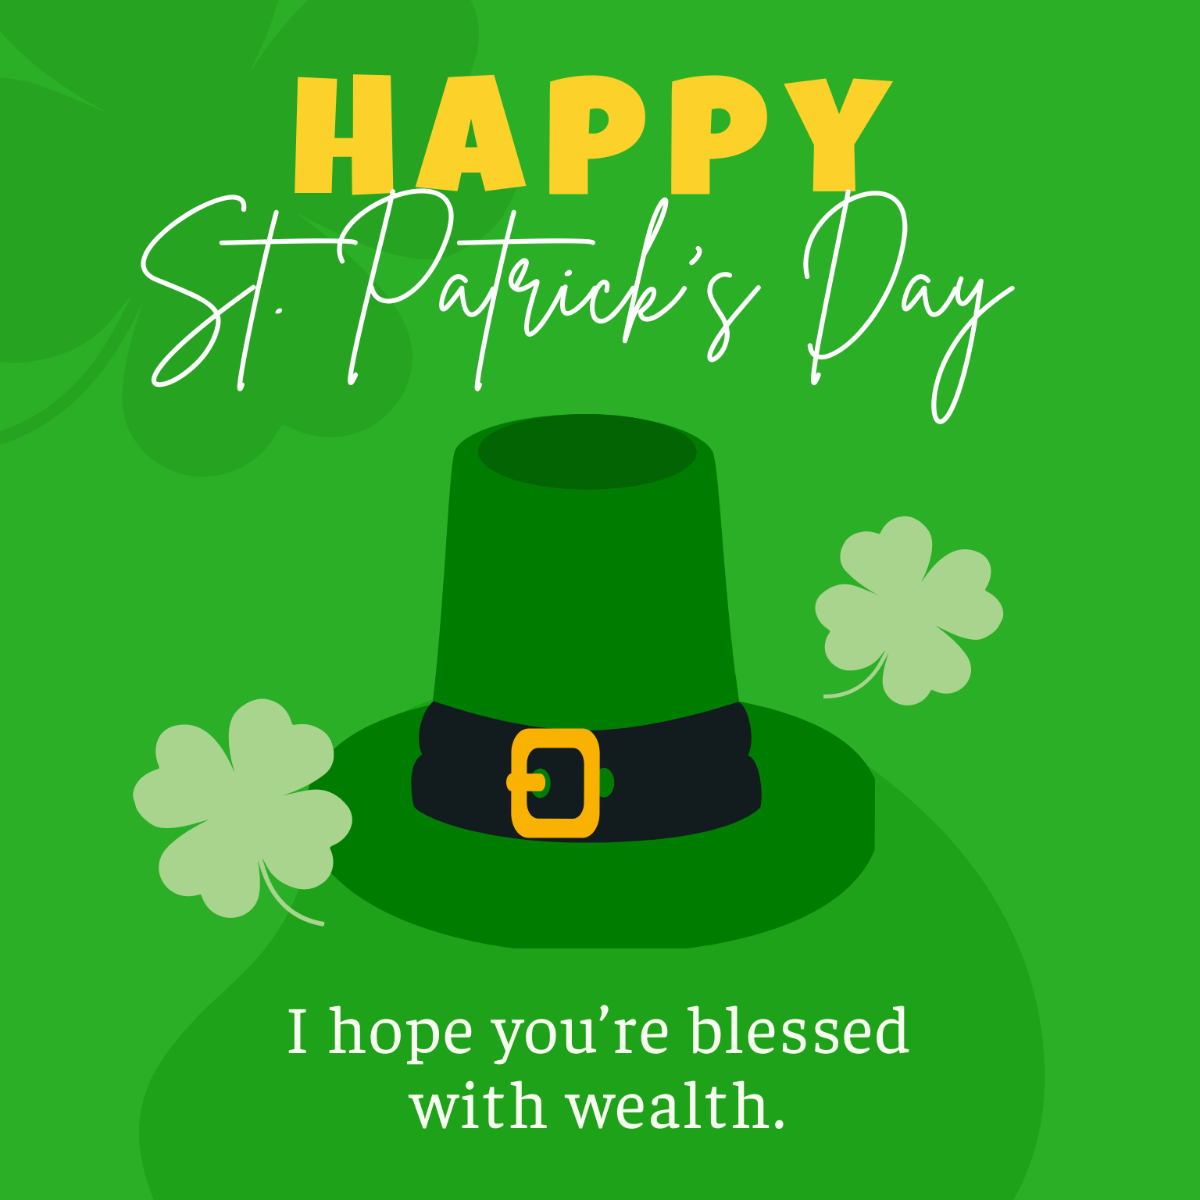 Free St. Patrick's Day Greeting Card Vector Template